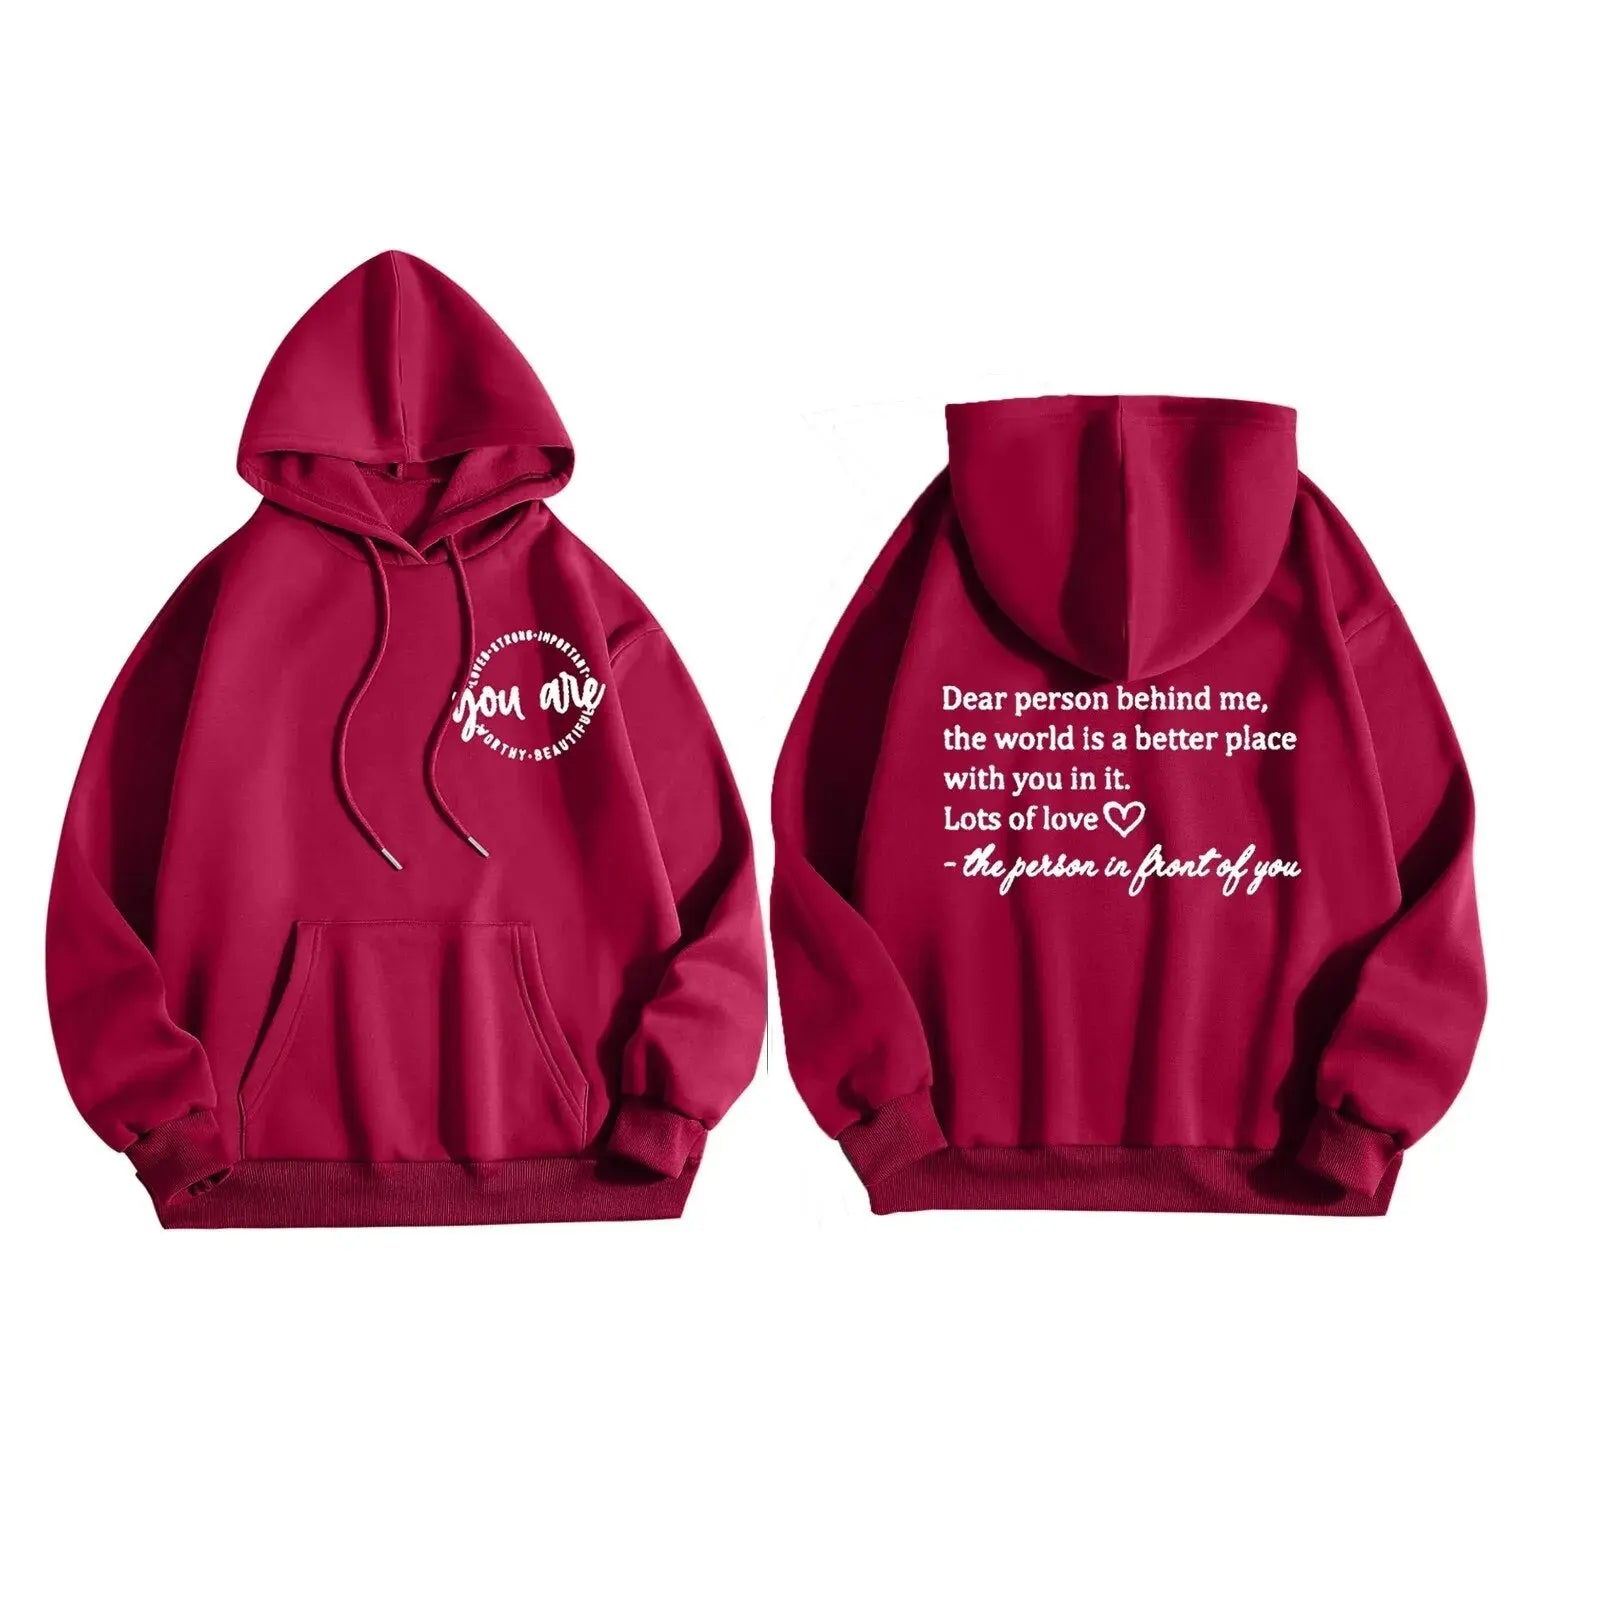 'You Are' + 'Dear Person Behind Me' Hoodie